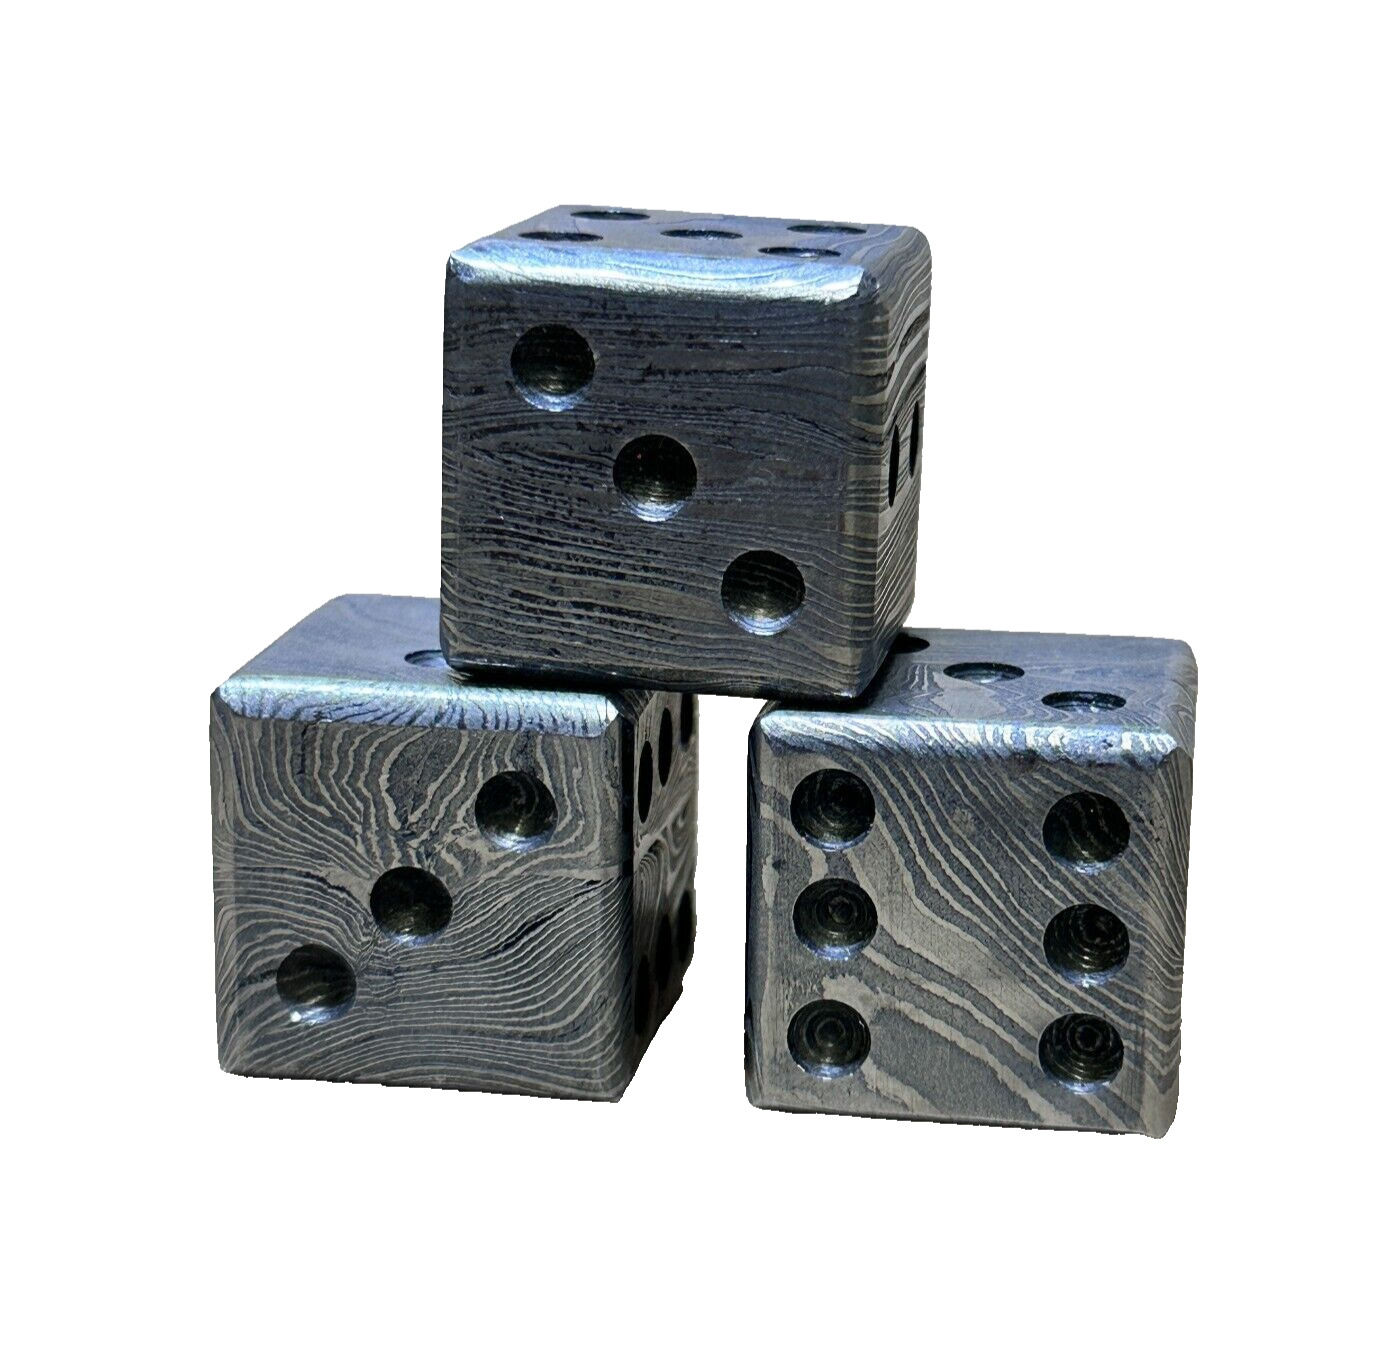 16mm Damascus Steel Dice pair 16mm, Game Dice, Handmade Dices, Gamers Gift, 3 PK